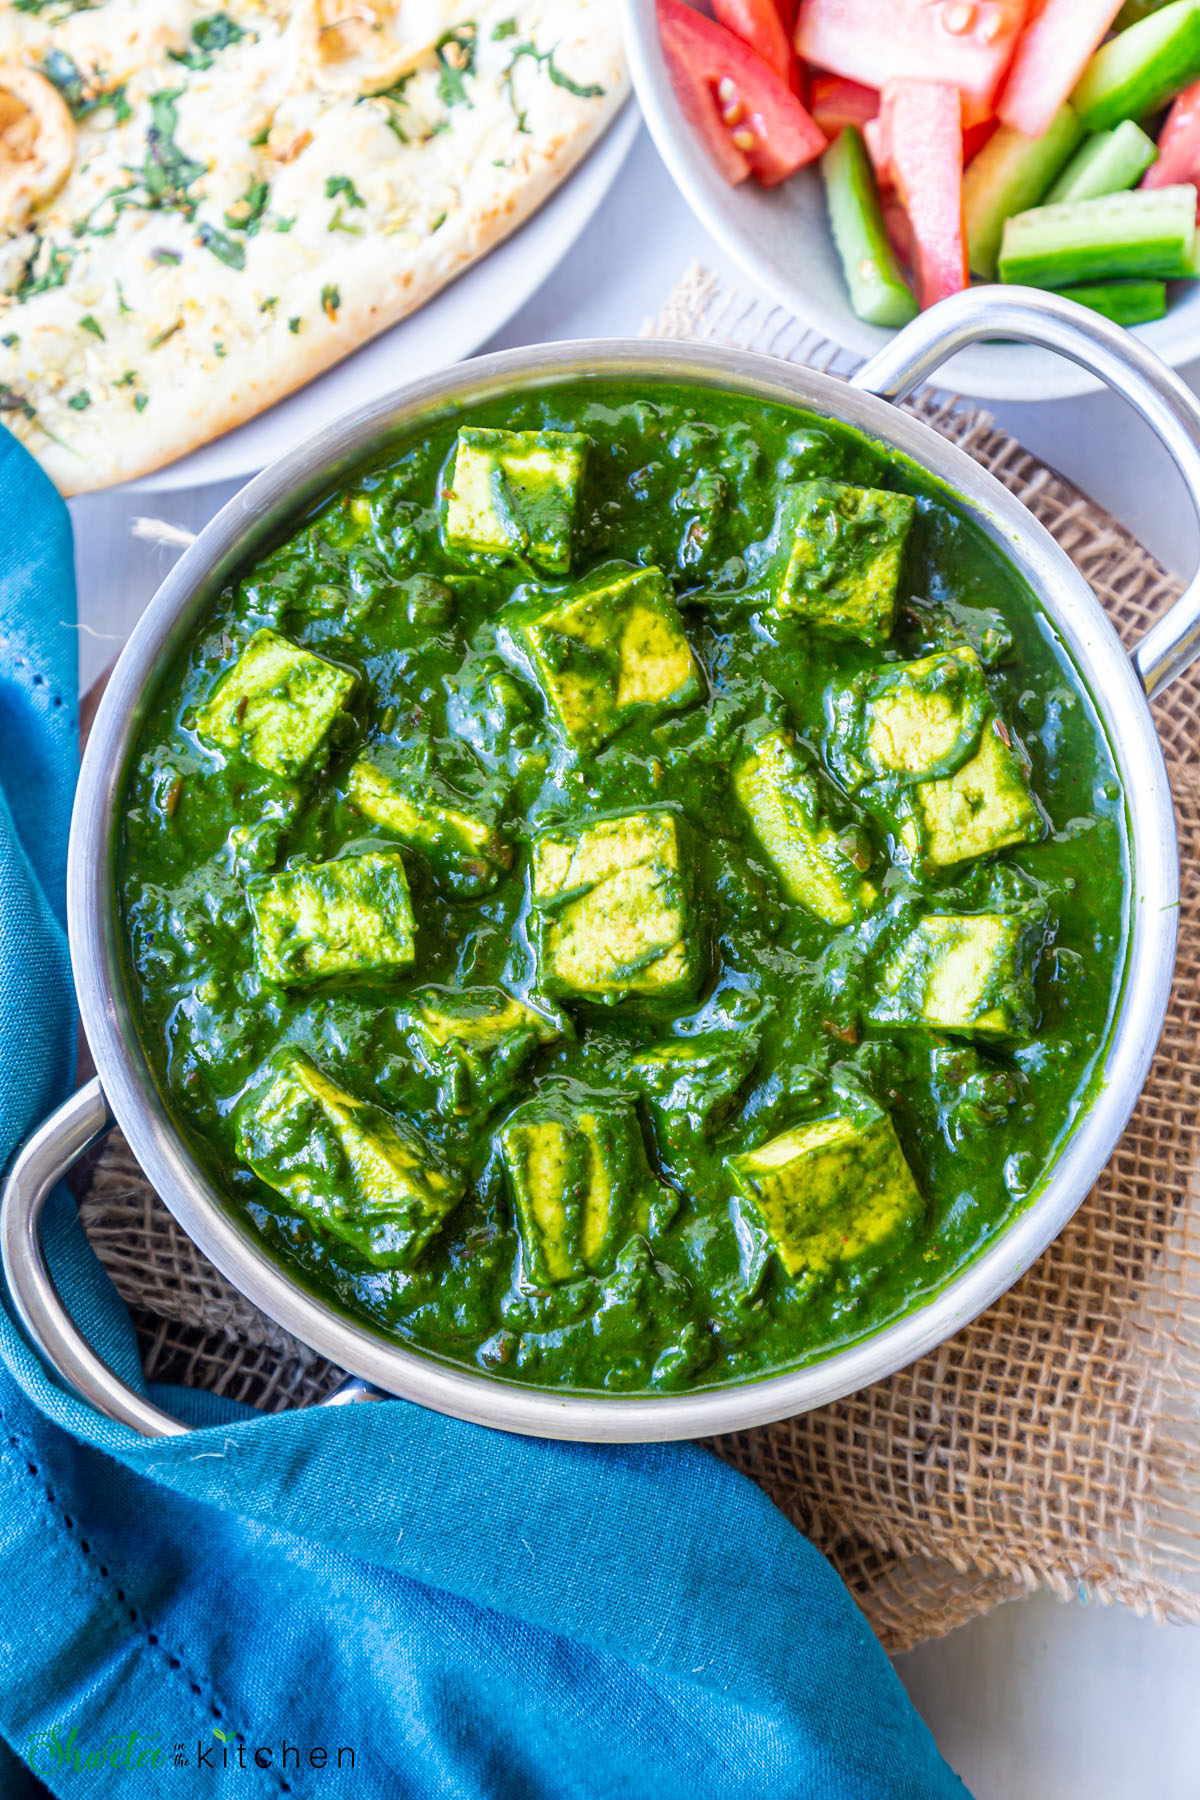 Small pan of palak paneer in center with plate of naan and salad bowl on side